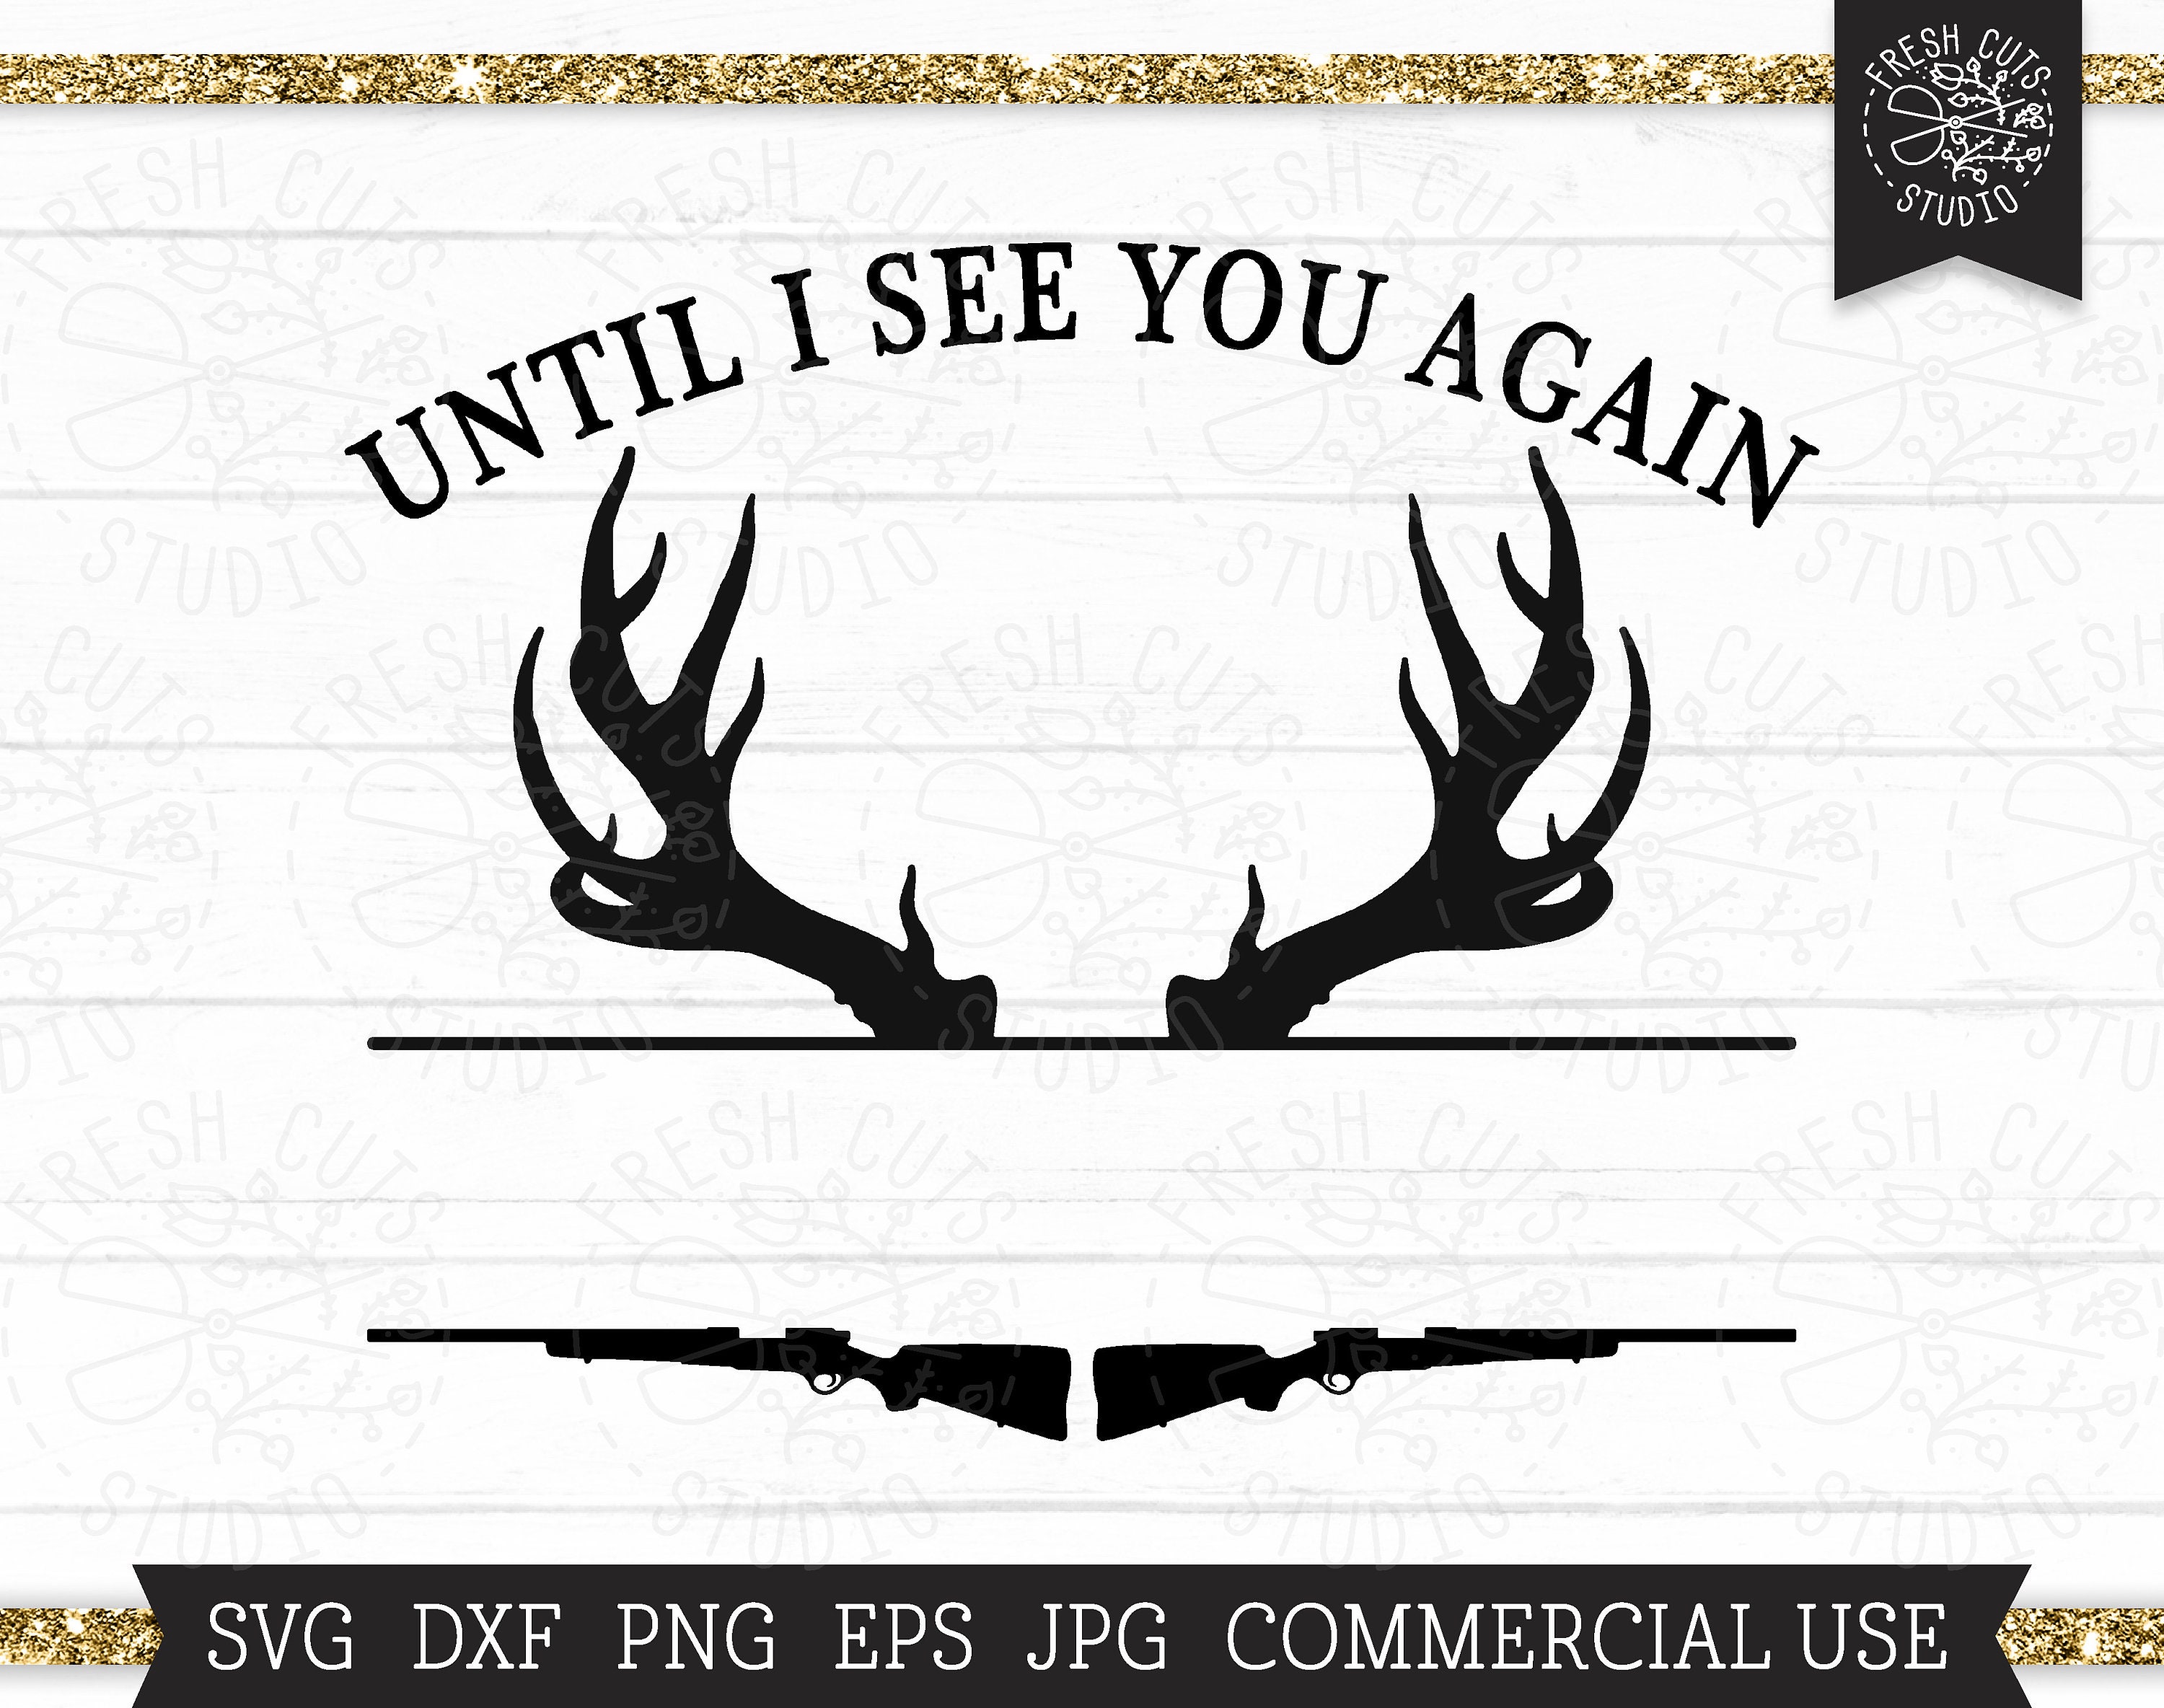 Deer and Fish Hunting Svg, Hunting Decal Gift Svg, Hunting Season Svg, Deer  and Fish Hunting Cut File, Instant Download Files for Cricut 